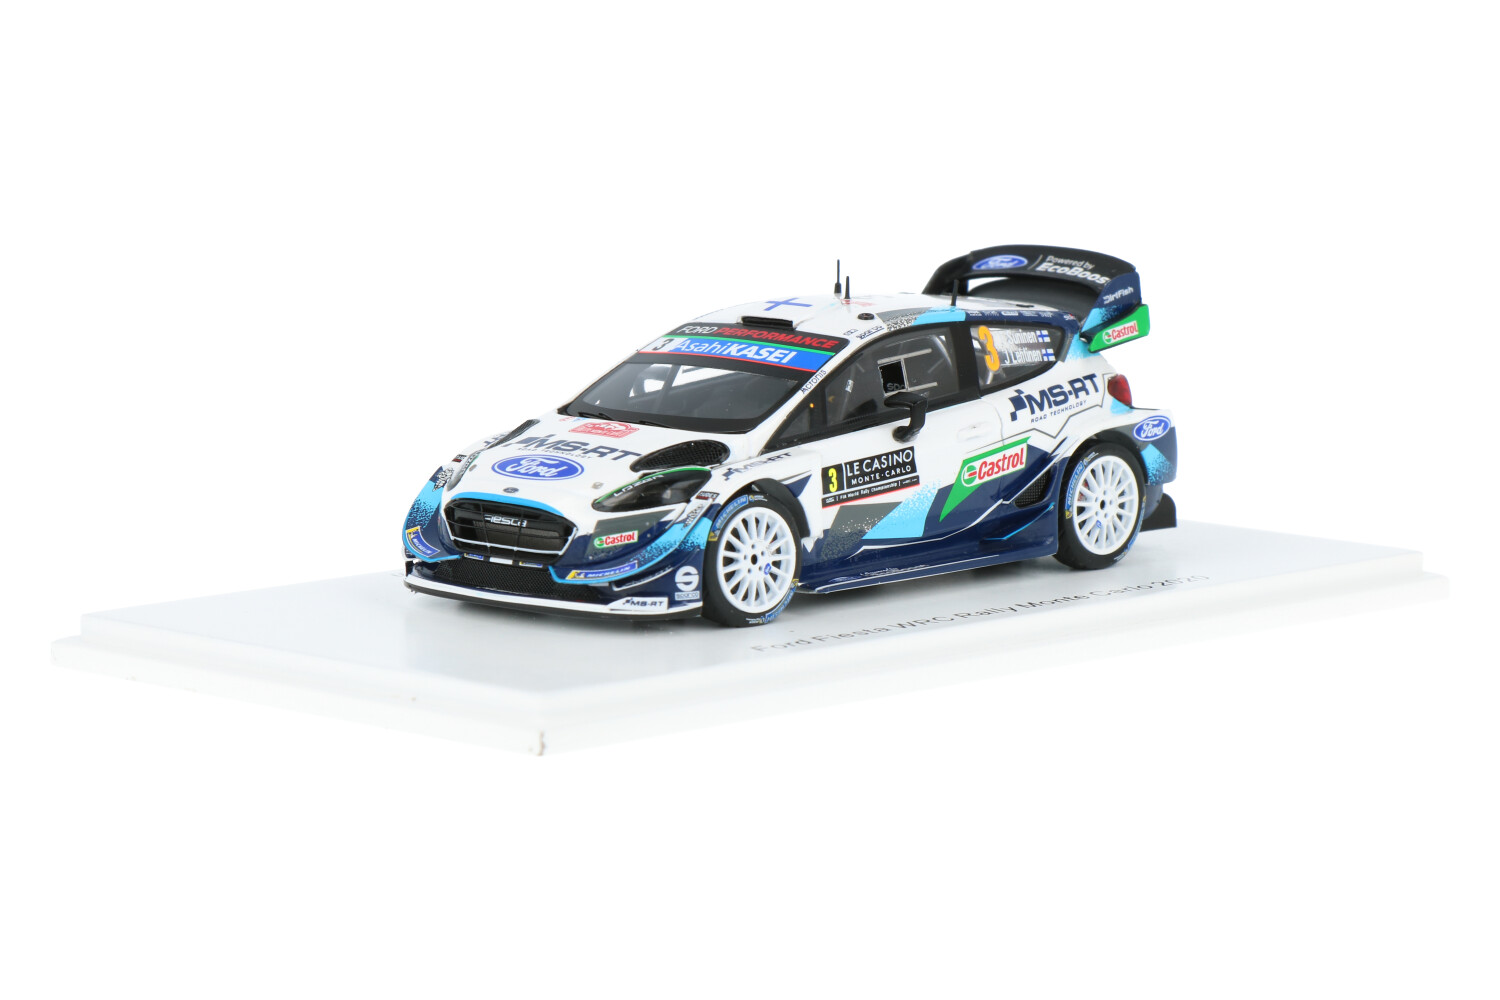 Ford-Fiesta-WRC-Rally-Monte-Carlo-S6557_13159580006965578Ford-Fiesta-WRC-Rally-Monte-Carlo-S6557_Houseofmodelcars_.jpg